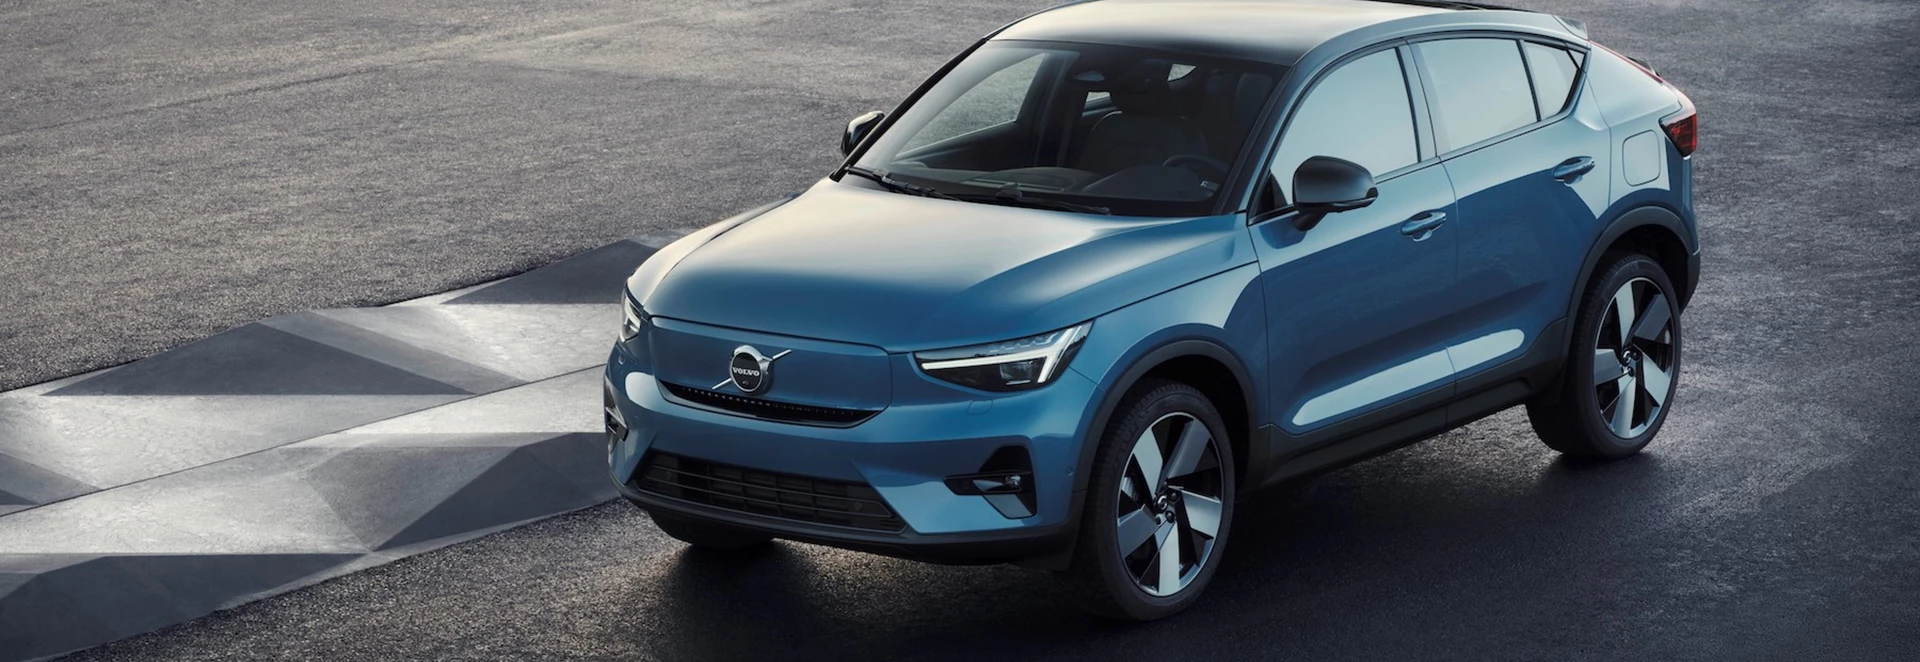 Volvo unveils striking C40 Recharge as new electric SUV 